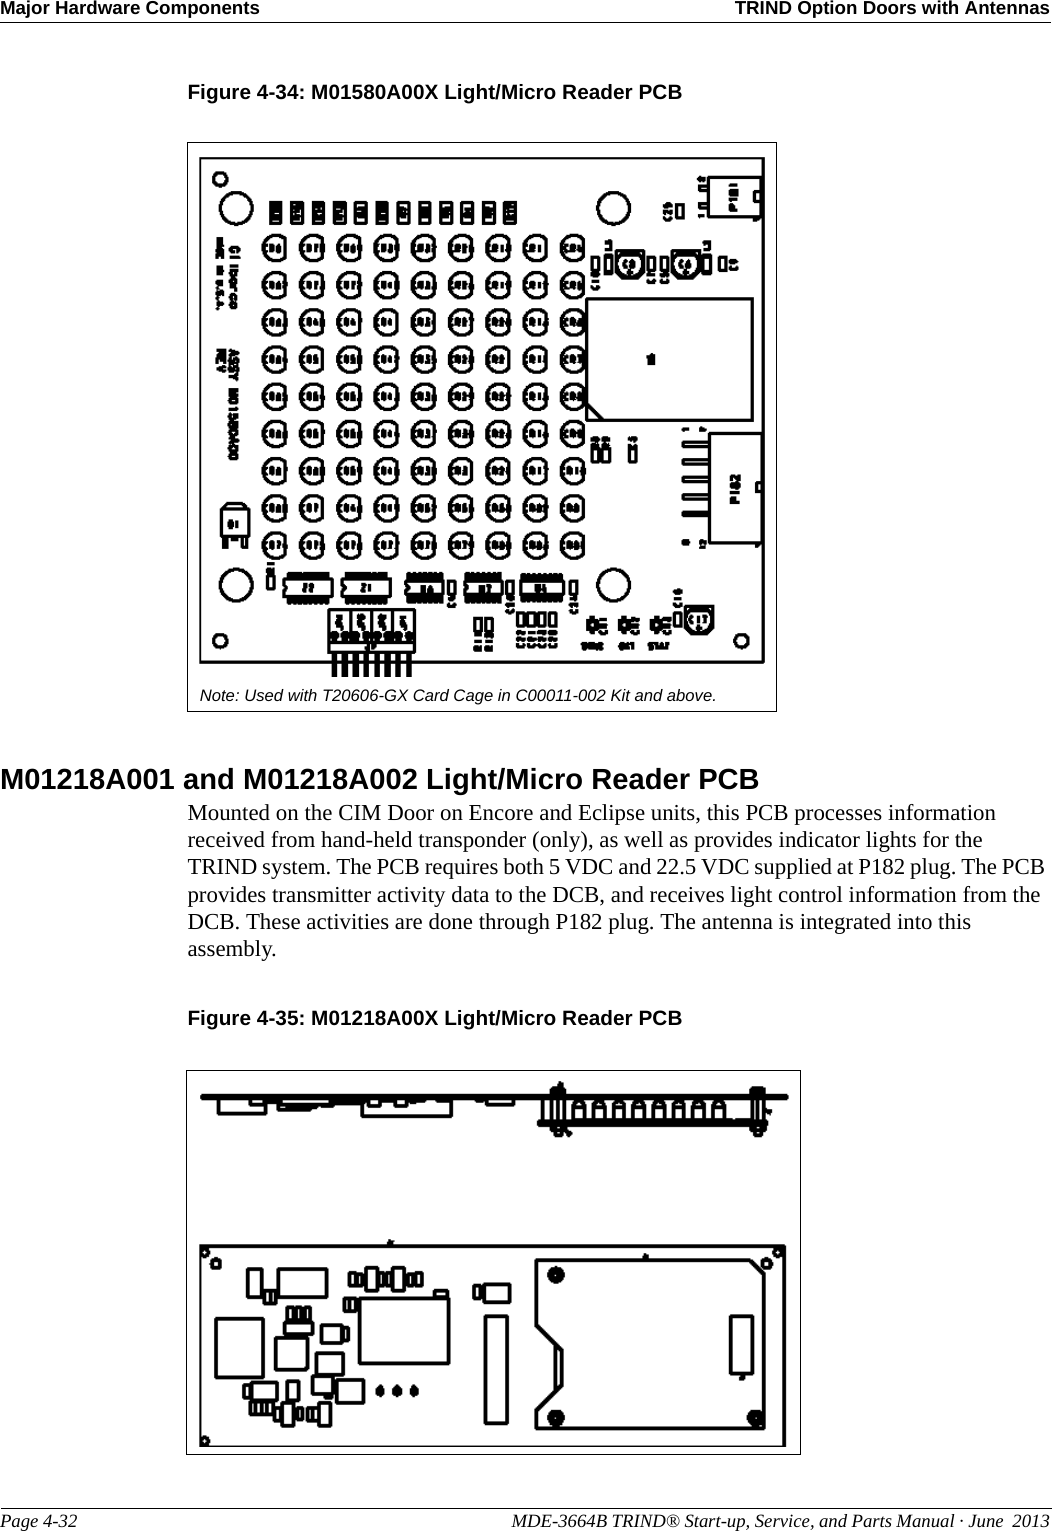 Major Hardware Components TRIND Option Doors with AntennasPage 4-32                                                                                                  MDE-3664B TRIND® Start-up, Service, and Parts Manual · June  2013Figure 4-34: M01580A00X Light/Micro Reader PCBNote: Used with T20606-GX Card Cage in C00011-002 Kit and above.M01218A001 and M01218A002 Light/Micro Reader PCBMounted on the CIM Door on Encore and Eclipse units, this PCB processes information received from hand-held transponder (only), as well as provides indicator lights for the TRIND system. The PCB requires both 5 VDC and 22.5 VDC supplied at P182 plug. The PCB provides transmitter activity data to the DCB, and receives light control information from the DCB. These activities are done through P182 plug. The antenna is integrated into this assembly.Figure 4-35: M01218A00X Light/Micro Reader PCB